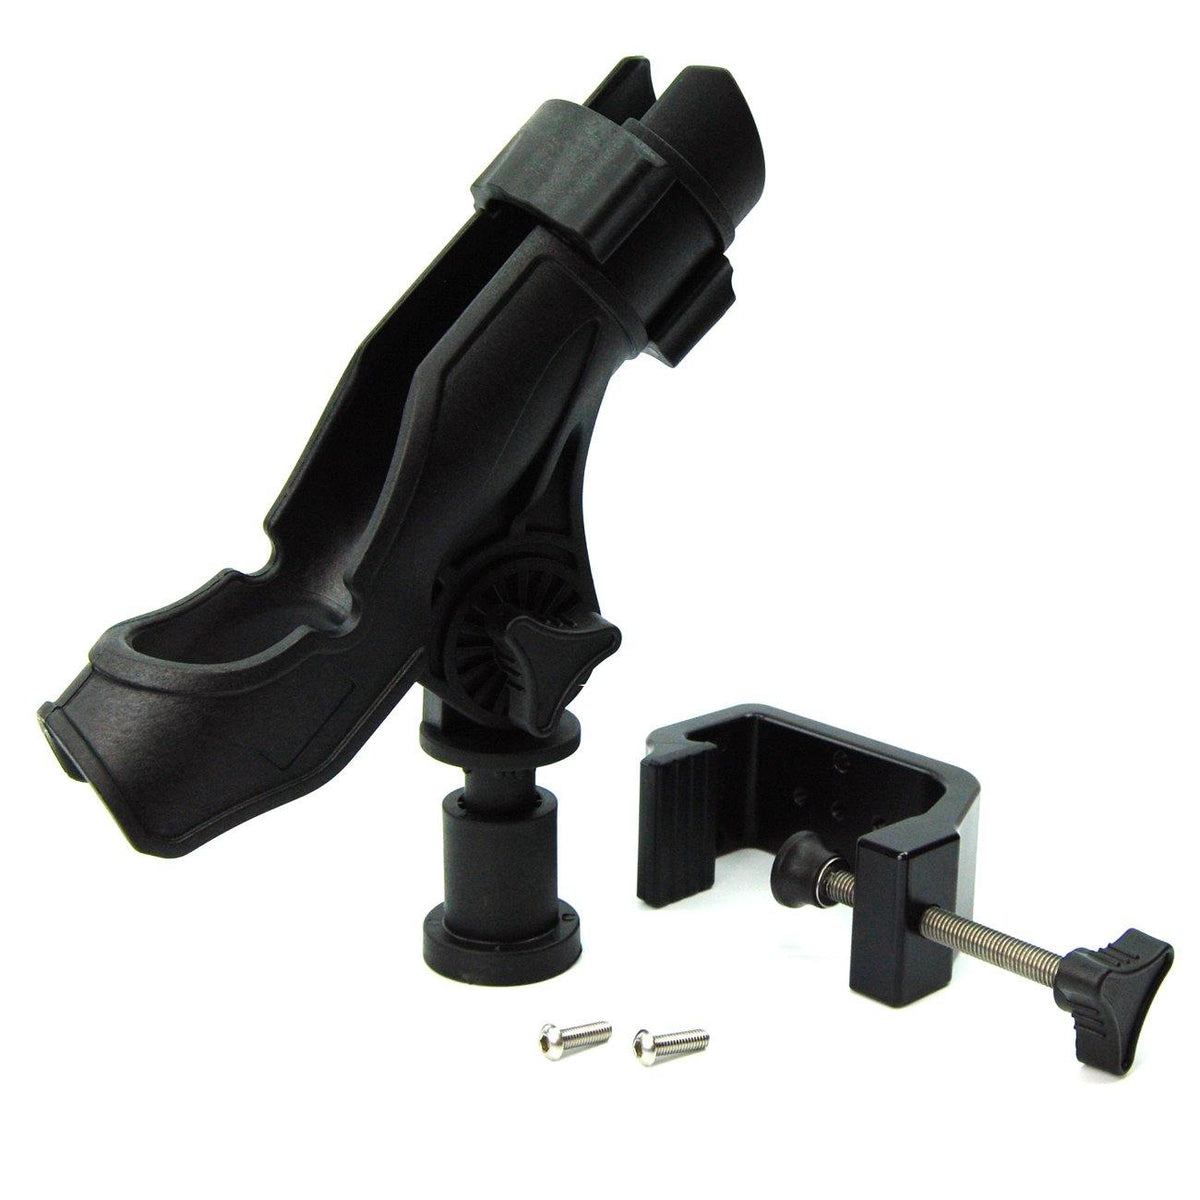 Fishing Rod Holder: Transom Mounting All Angle Nylon Holder with